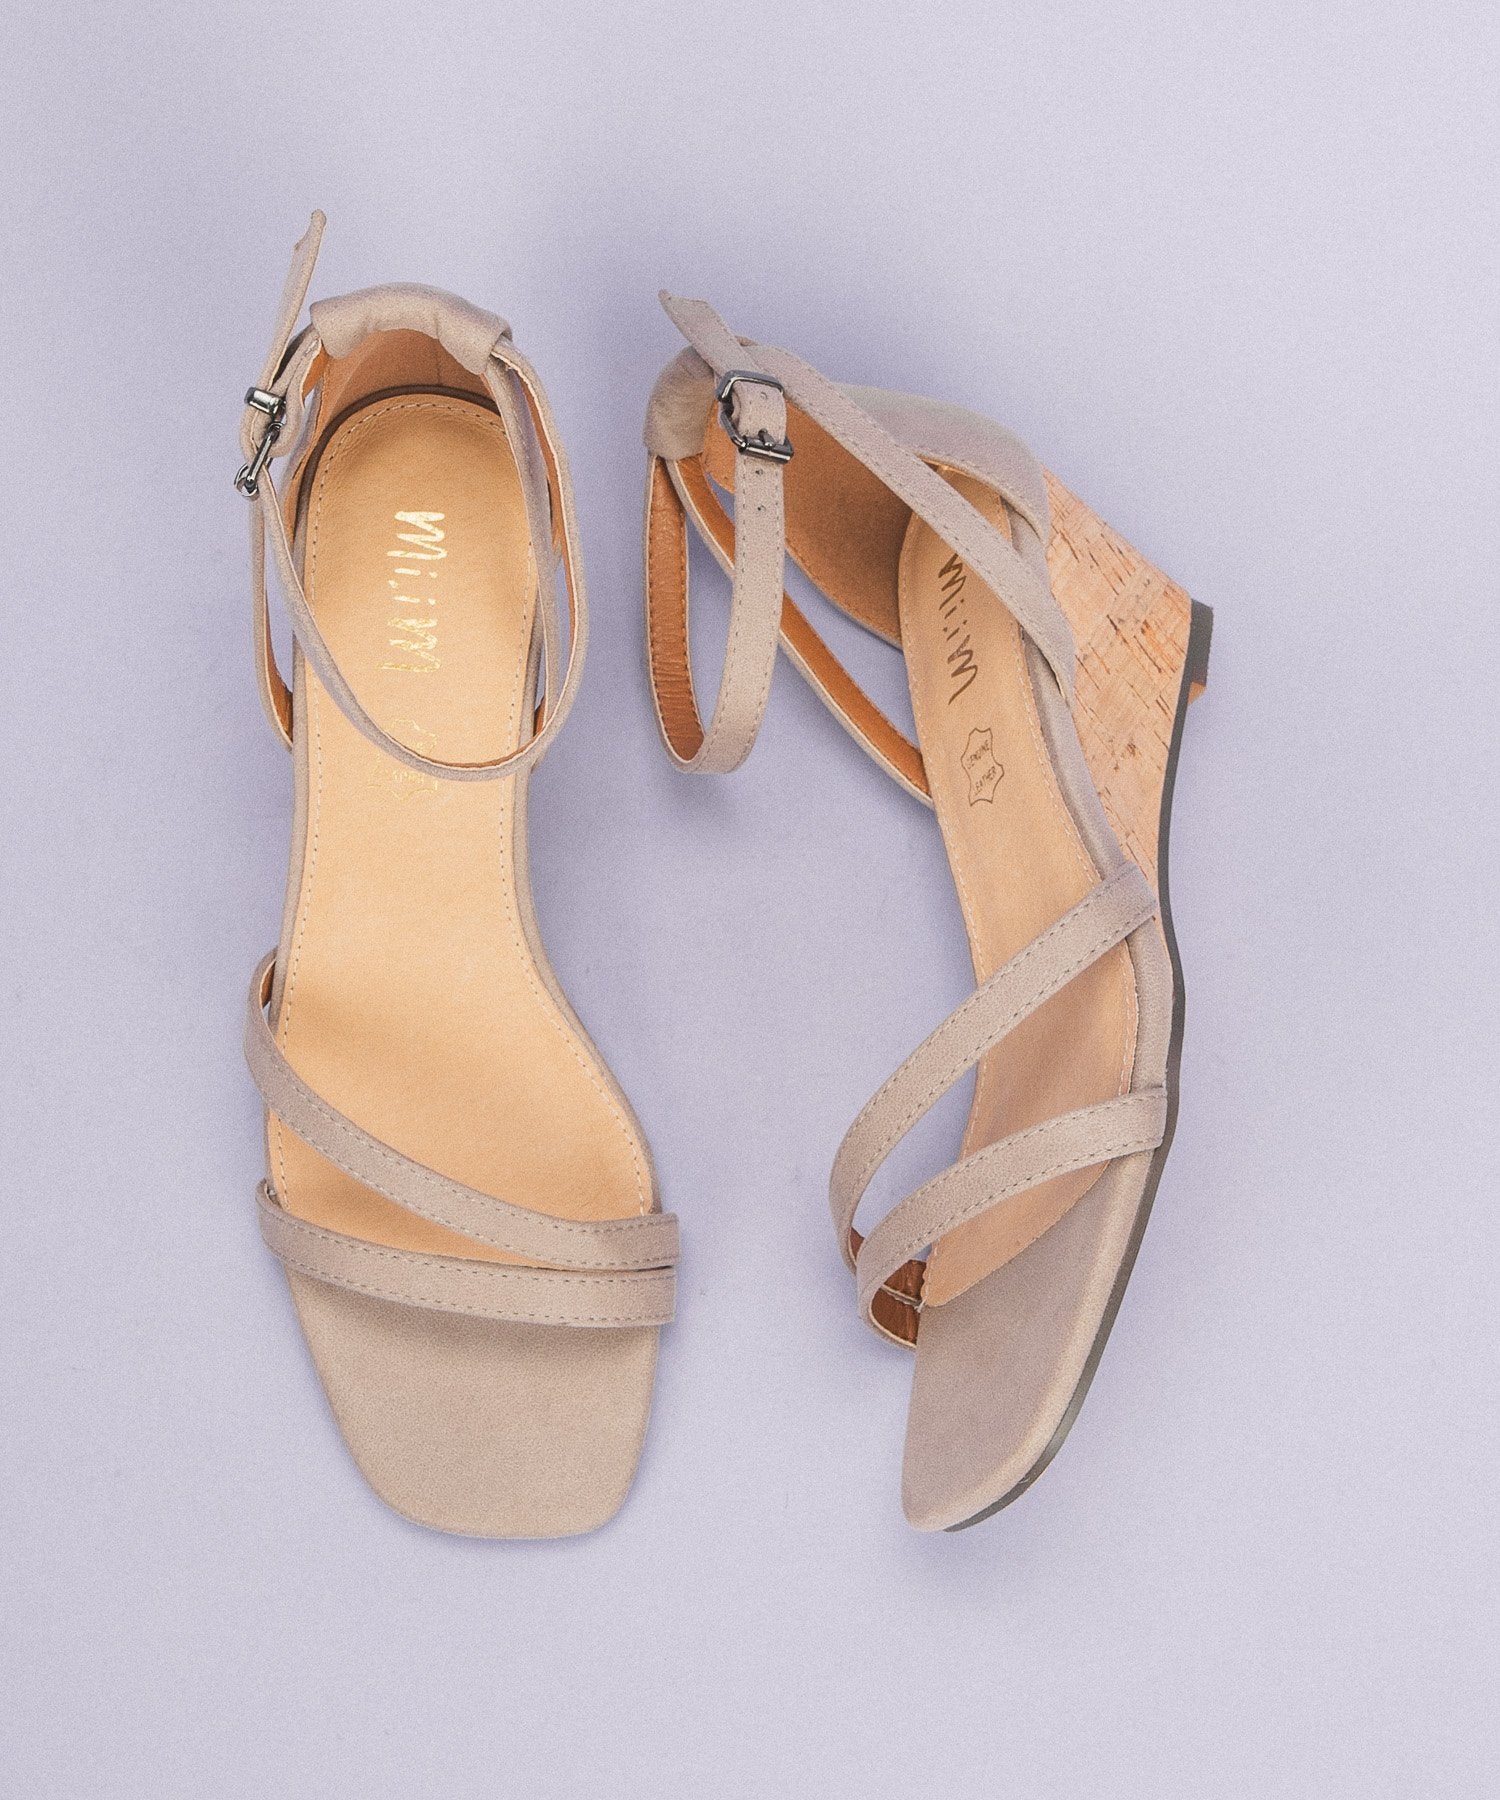 Strappy Wedge Sandal